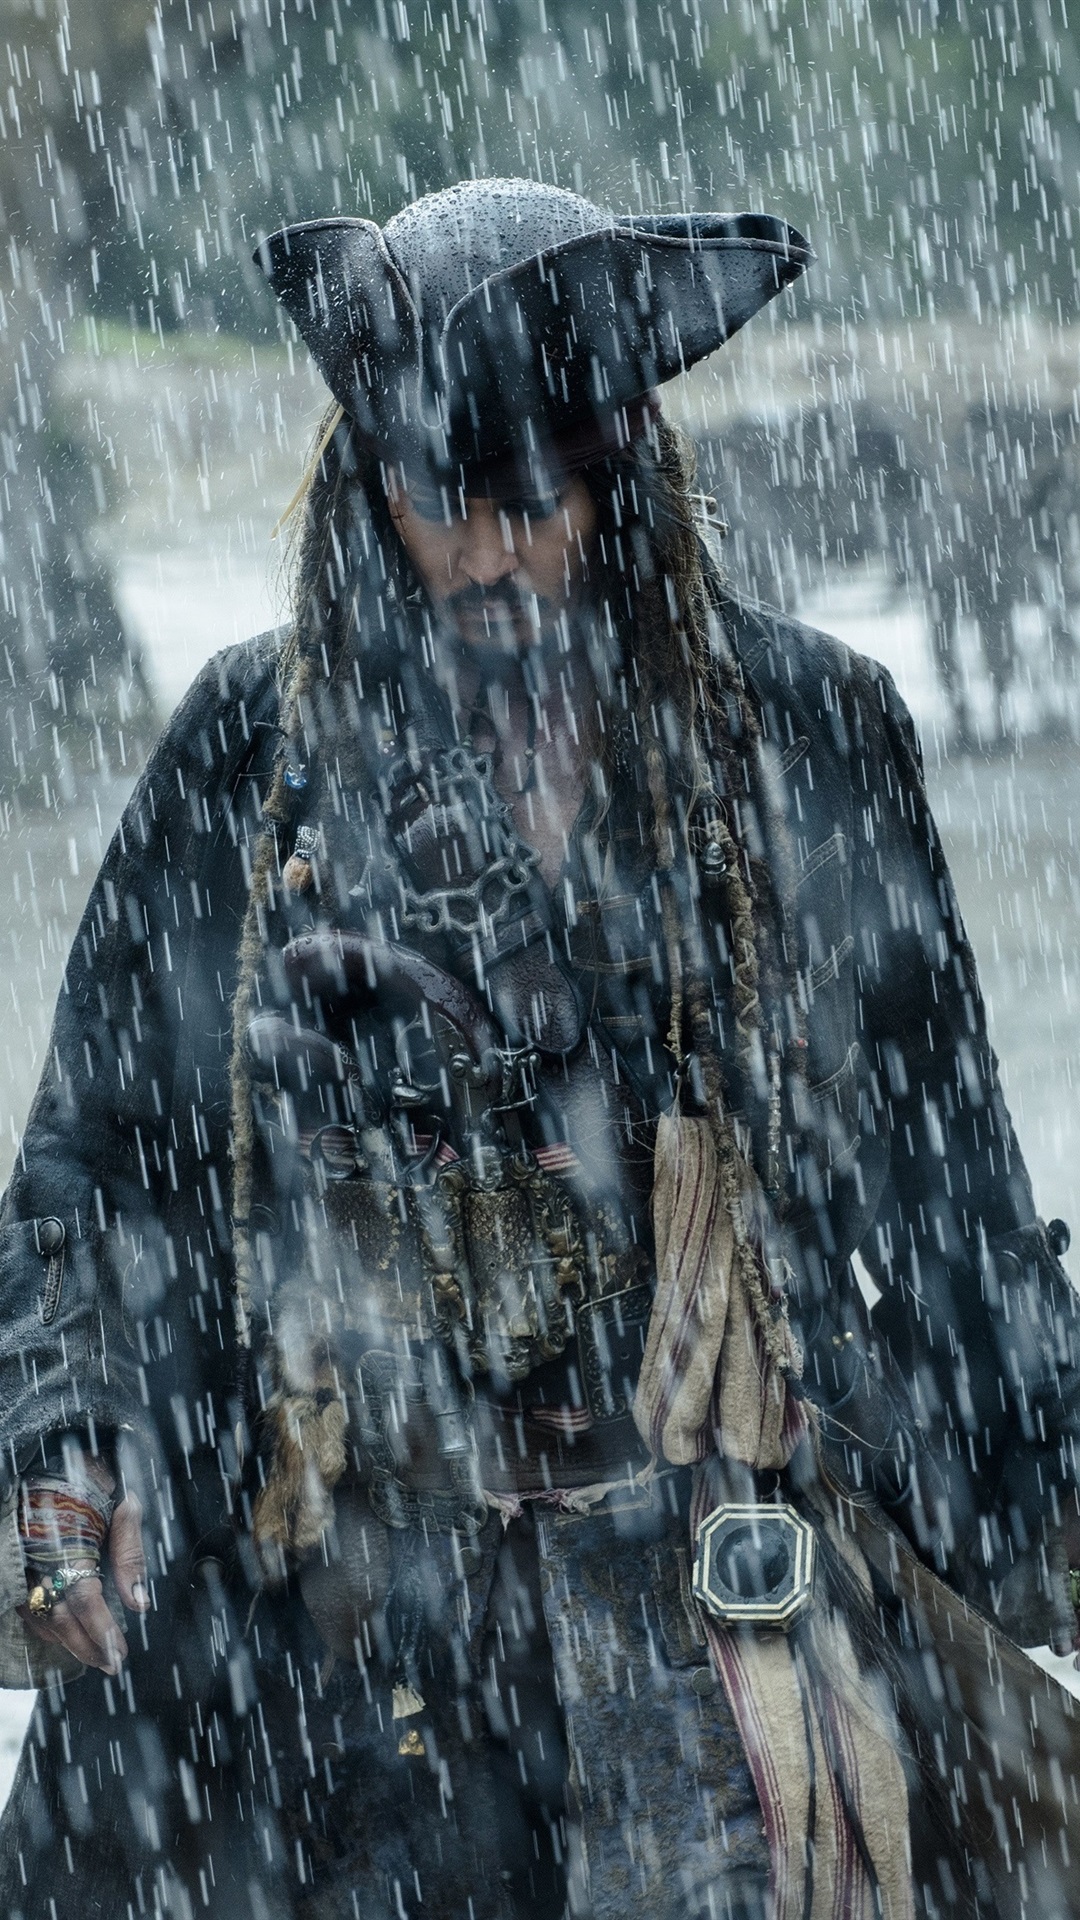 Iphone Wallpaper Pirates Of The Caribbean 5, Johnny - Johnny Depp Wallpaper For Iphone 6 - HD Wallpaper 